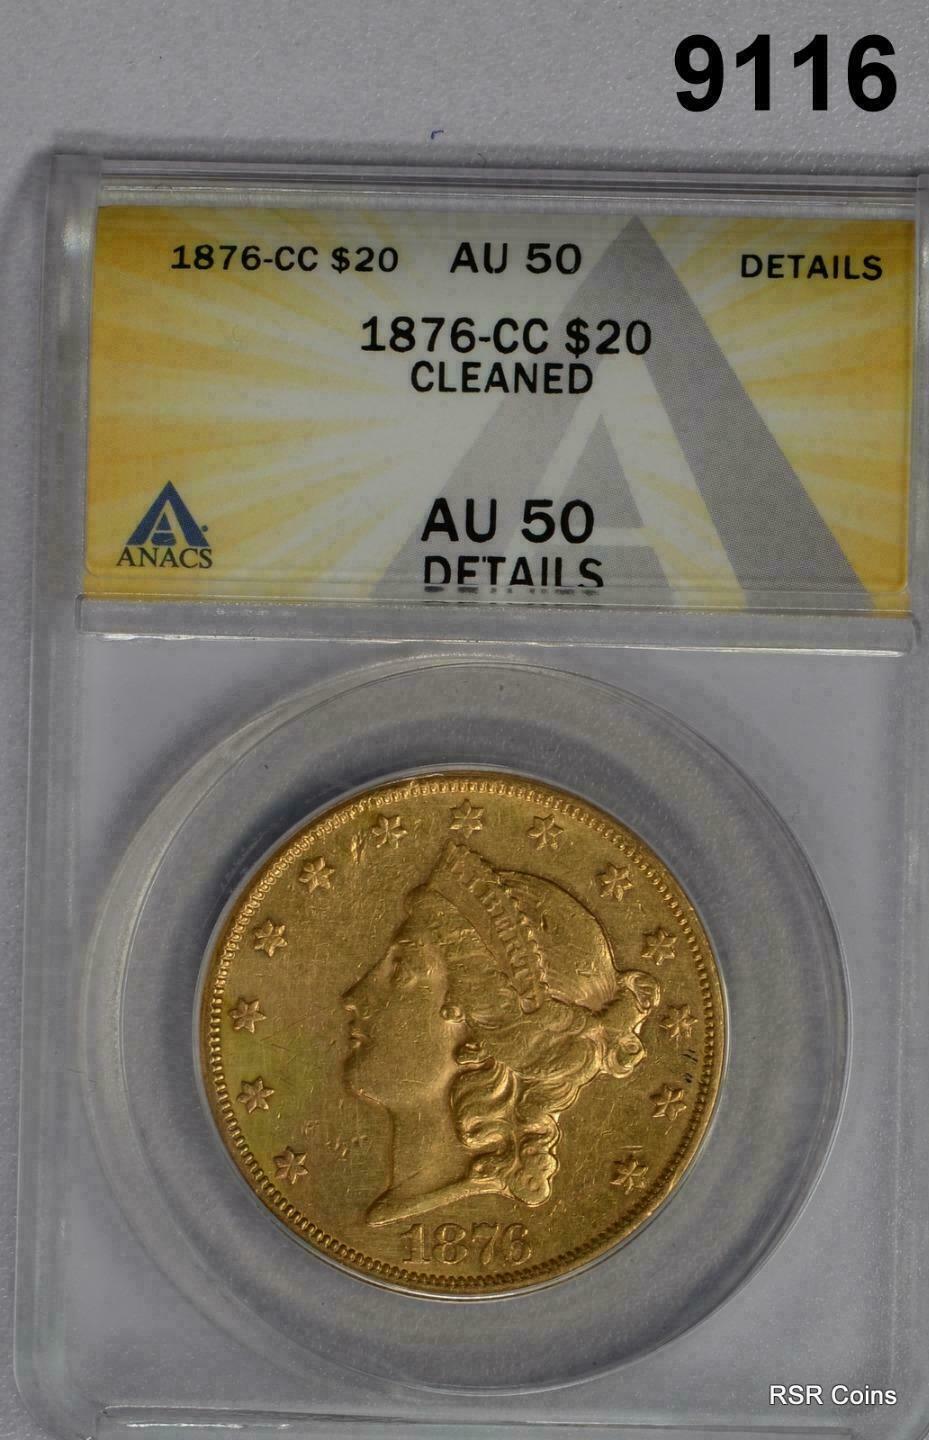 1876 CC RARE $20 GOLD LIBERTY ANACS CERTIFIED AU50 CLEANED MINTAGE 138,441 #9116